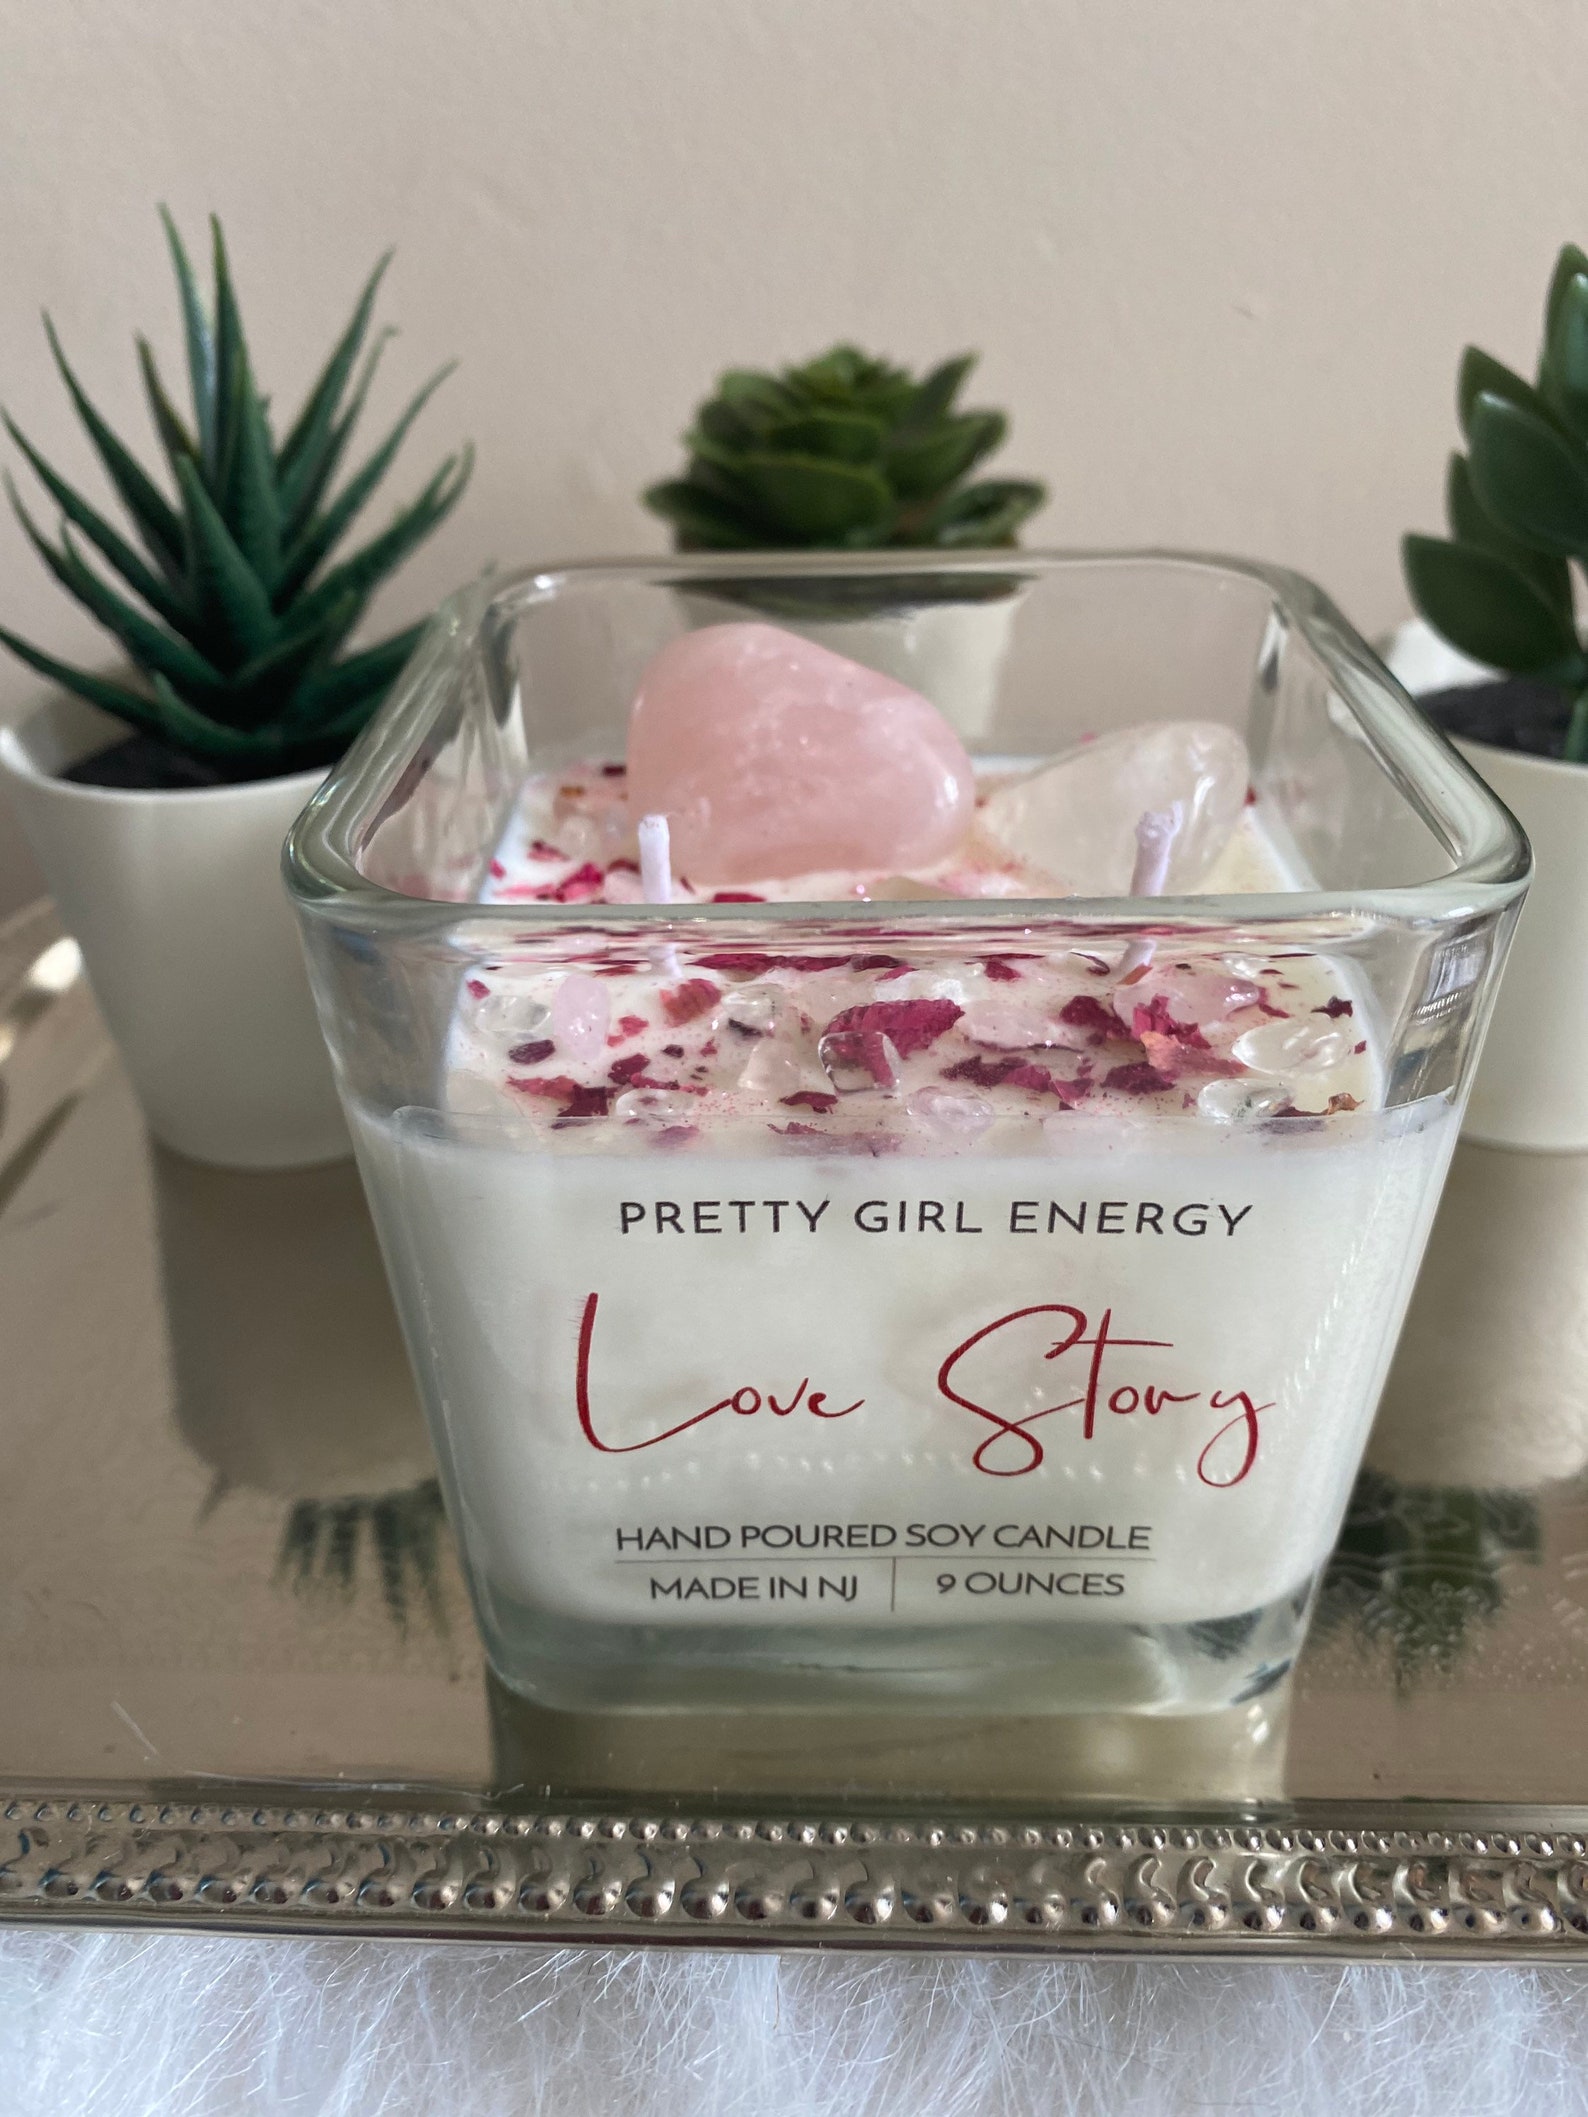 Love Story Crystal Intention Candle Self Love Happiness - Etsy